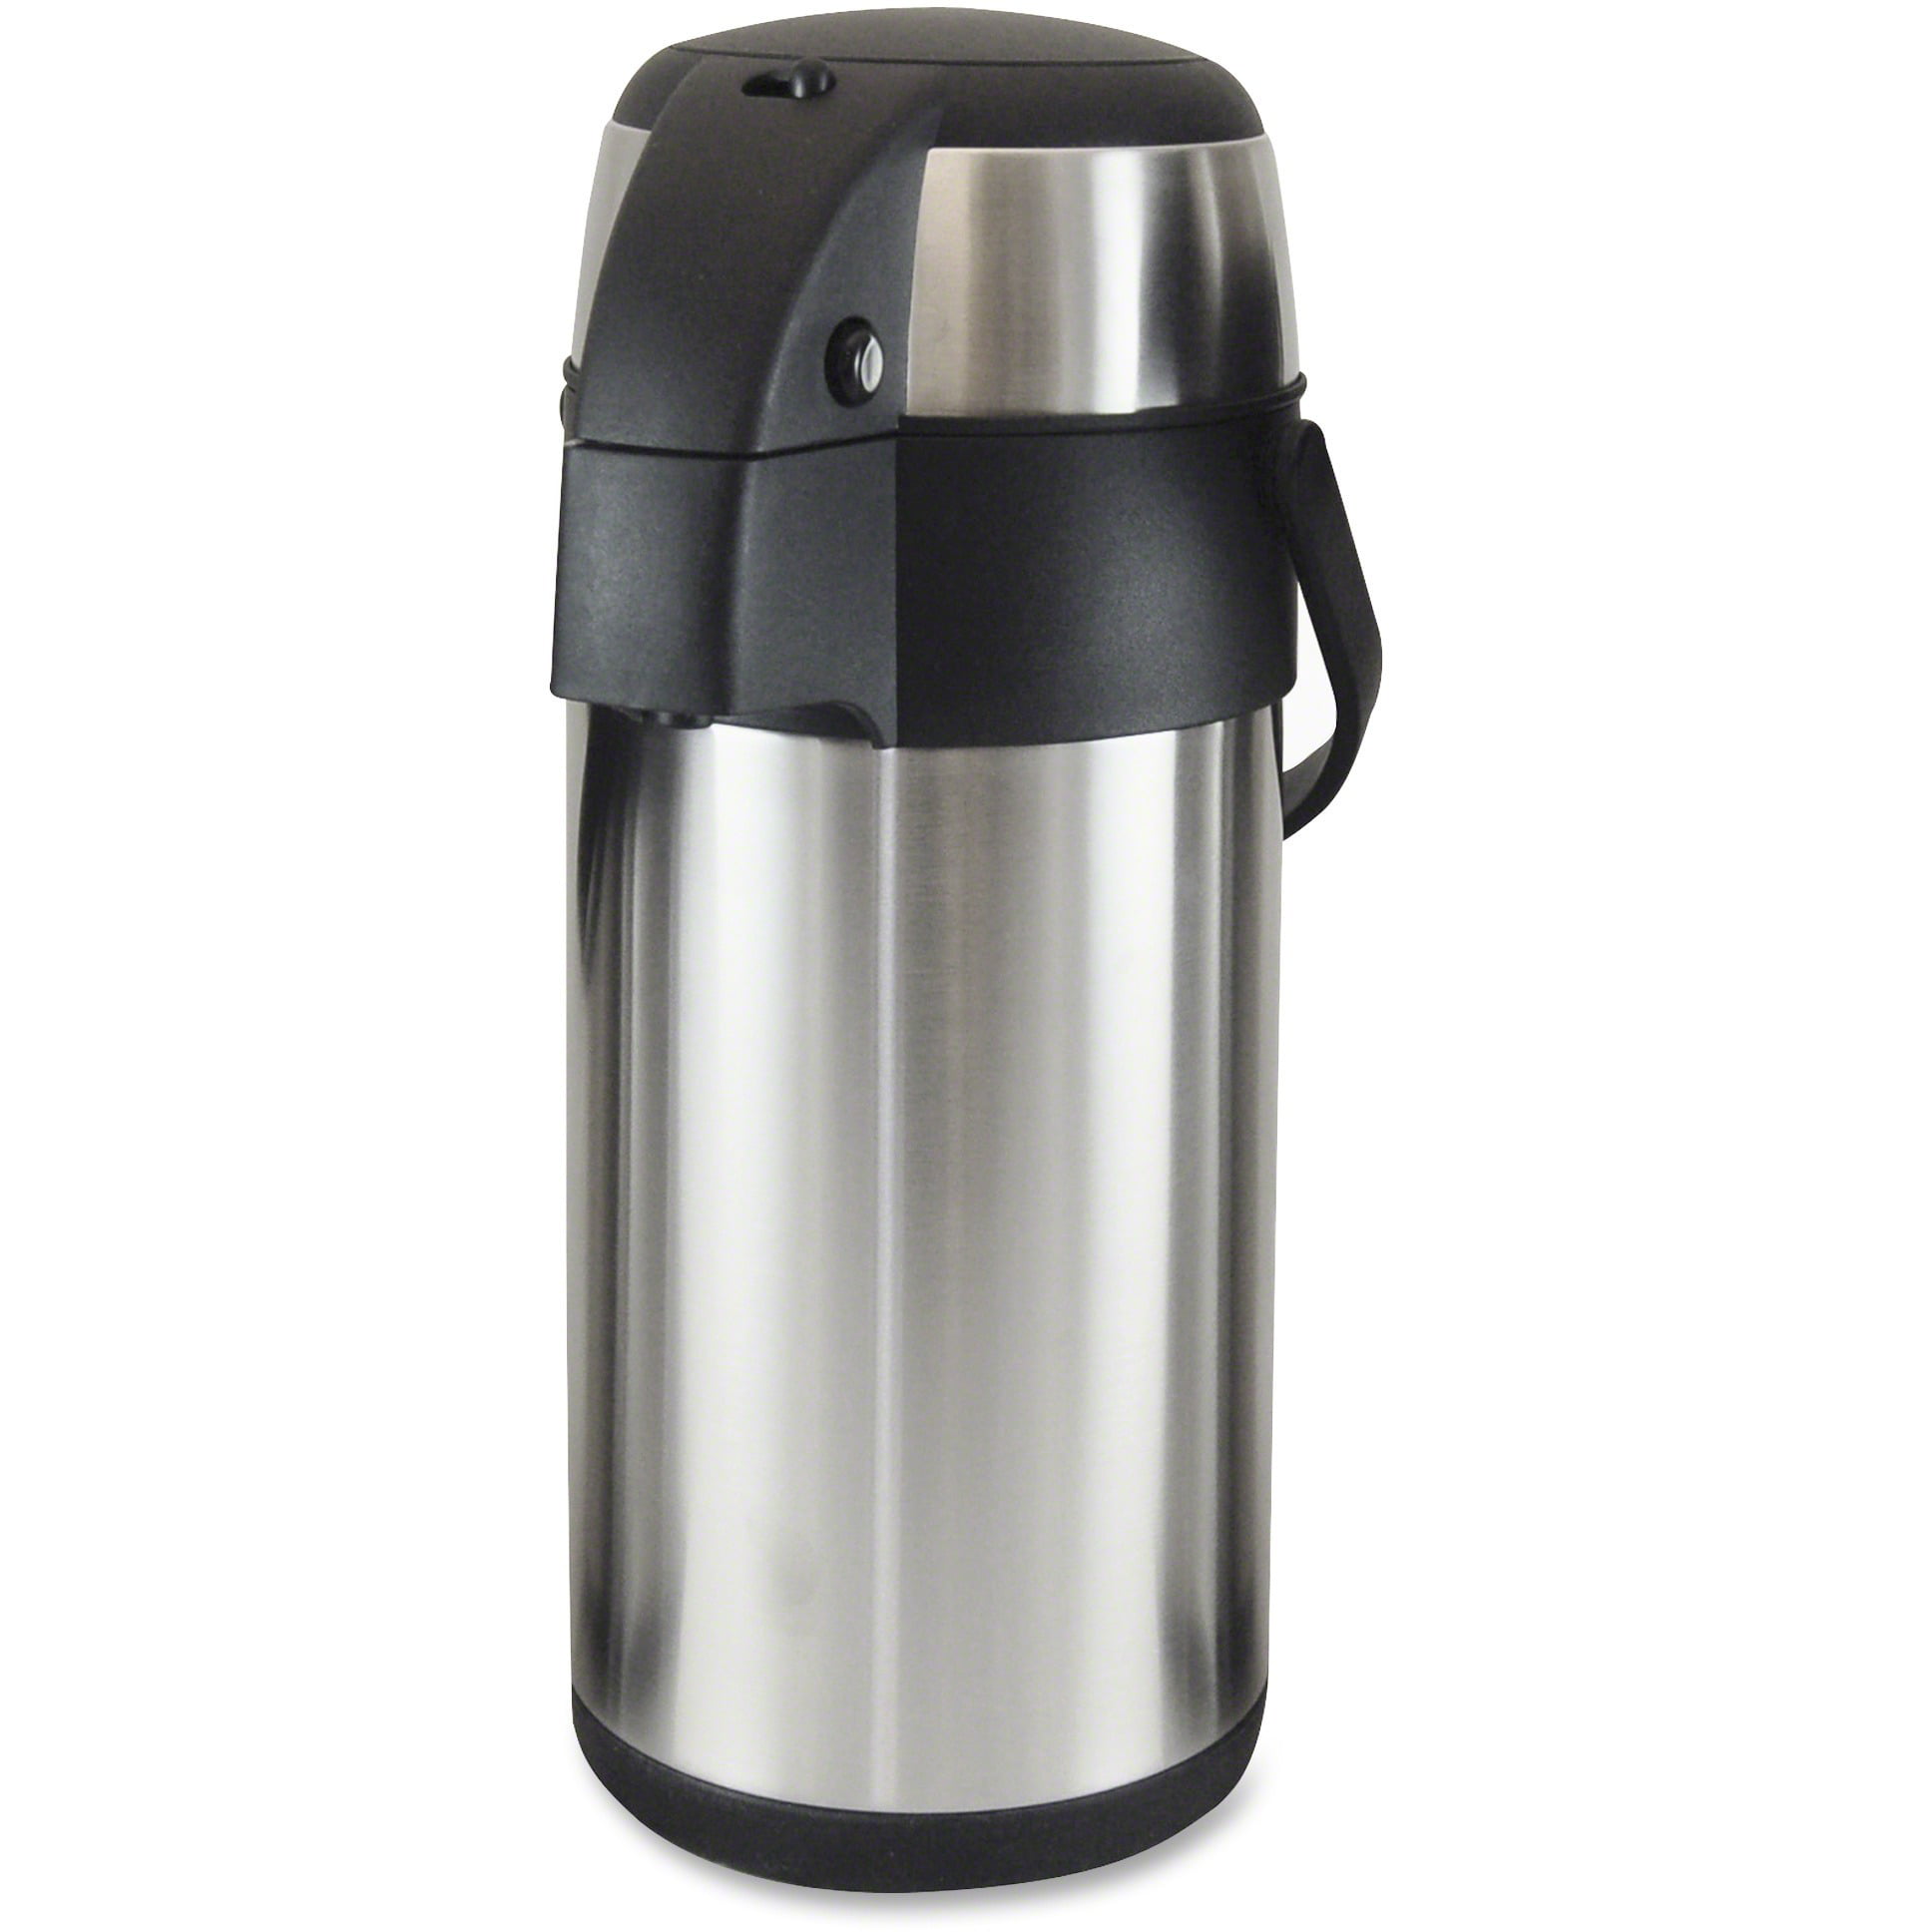 Coleman 2 5l Air Pot Stainless Steel 794560161539 for sale online 